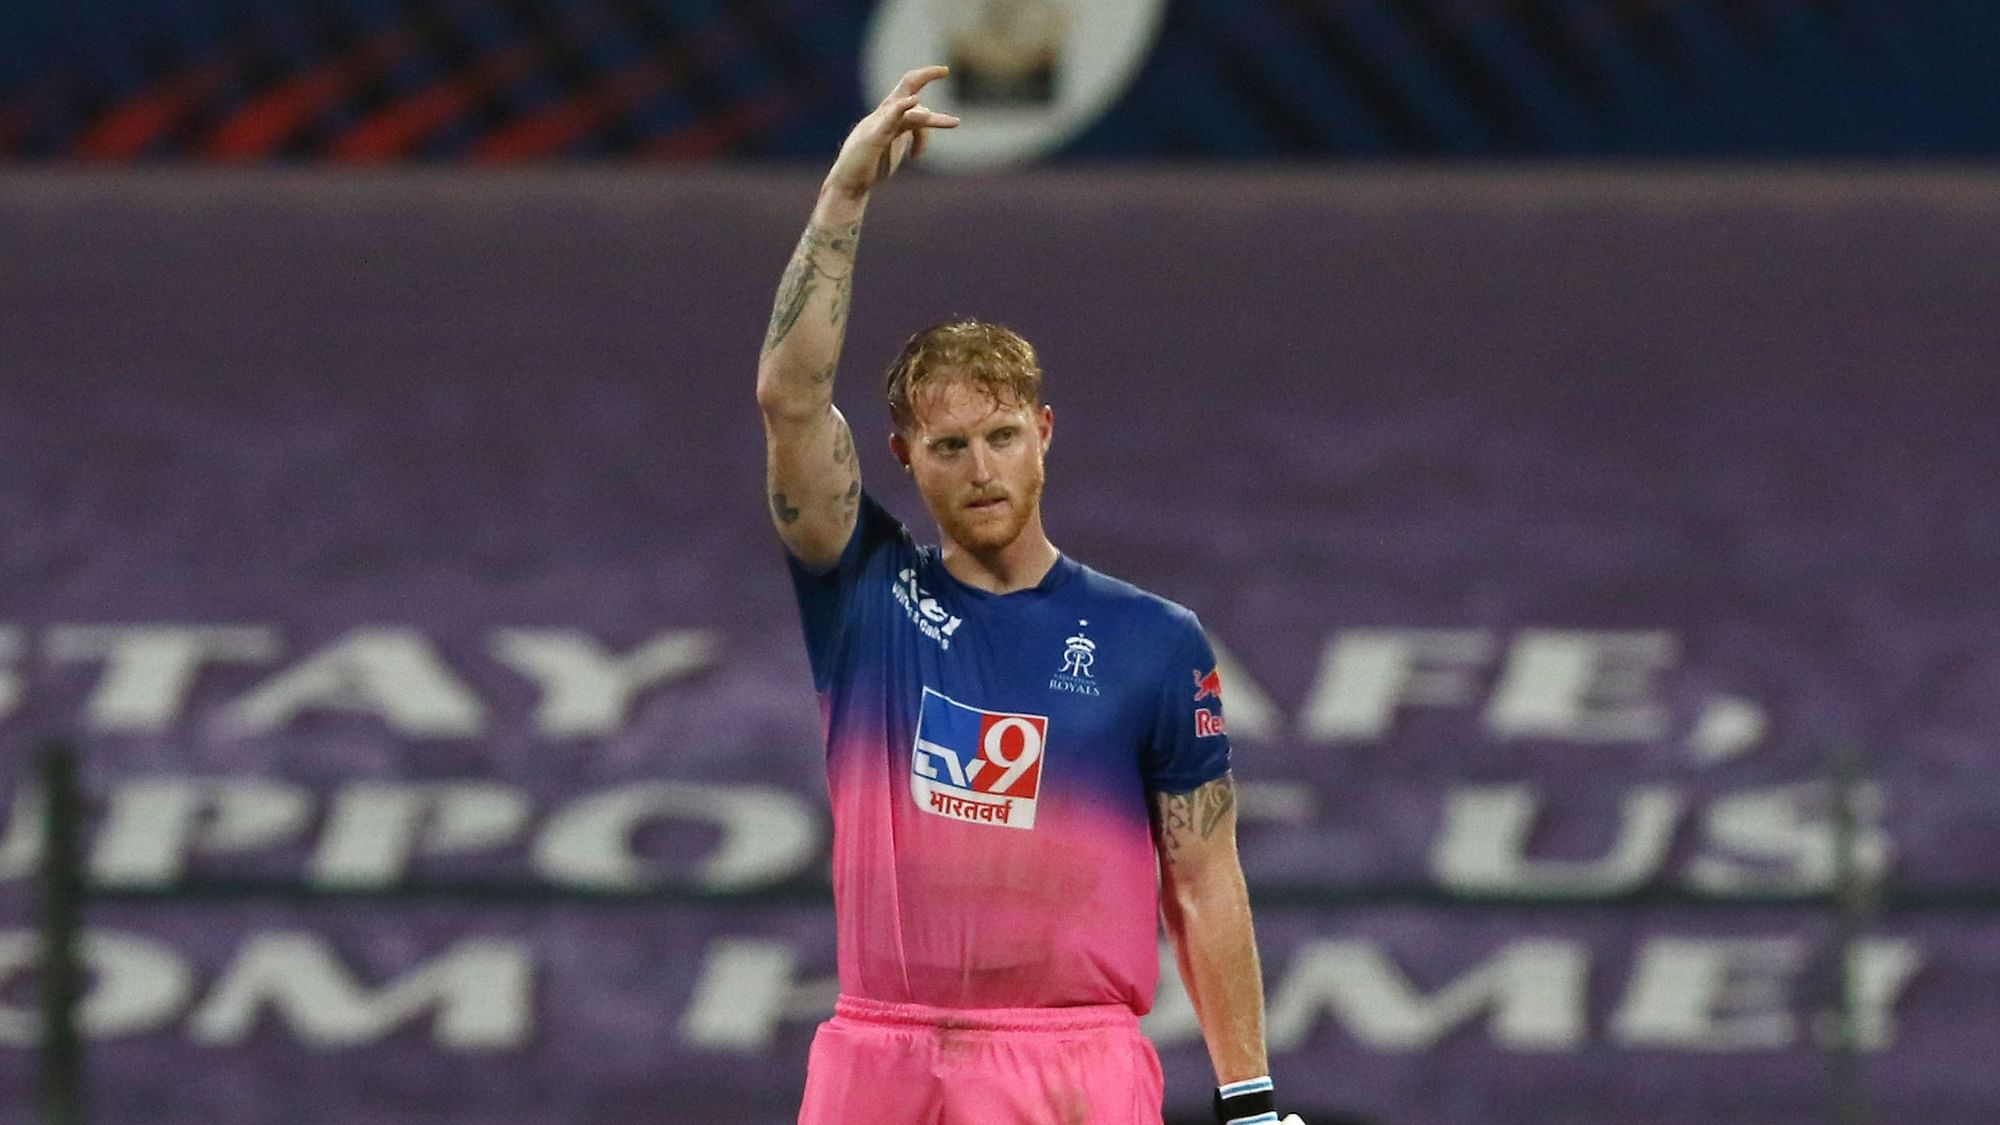 Ben Stokes says he hopes his century brings a bit of happiness to his father in New Zealand who is being treated for cancer.